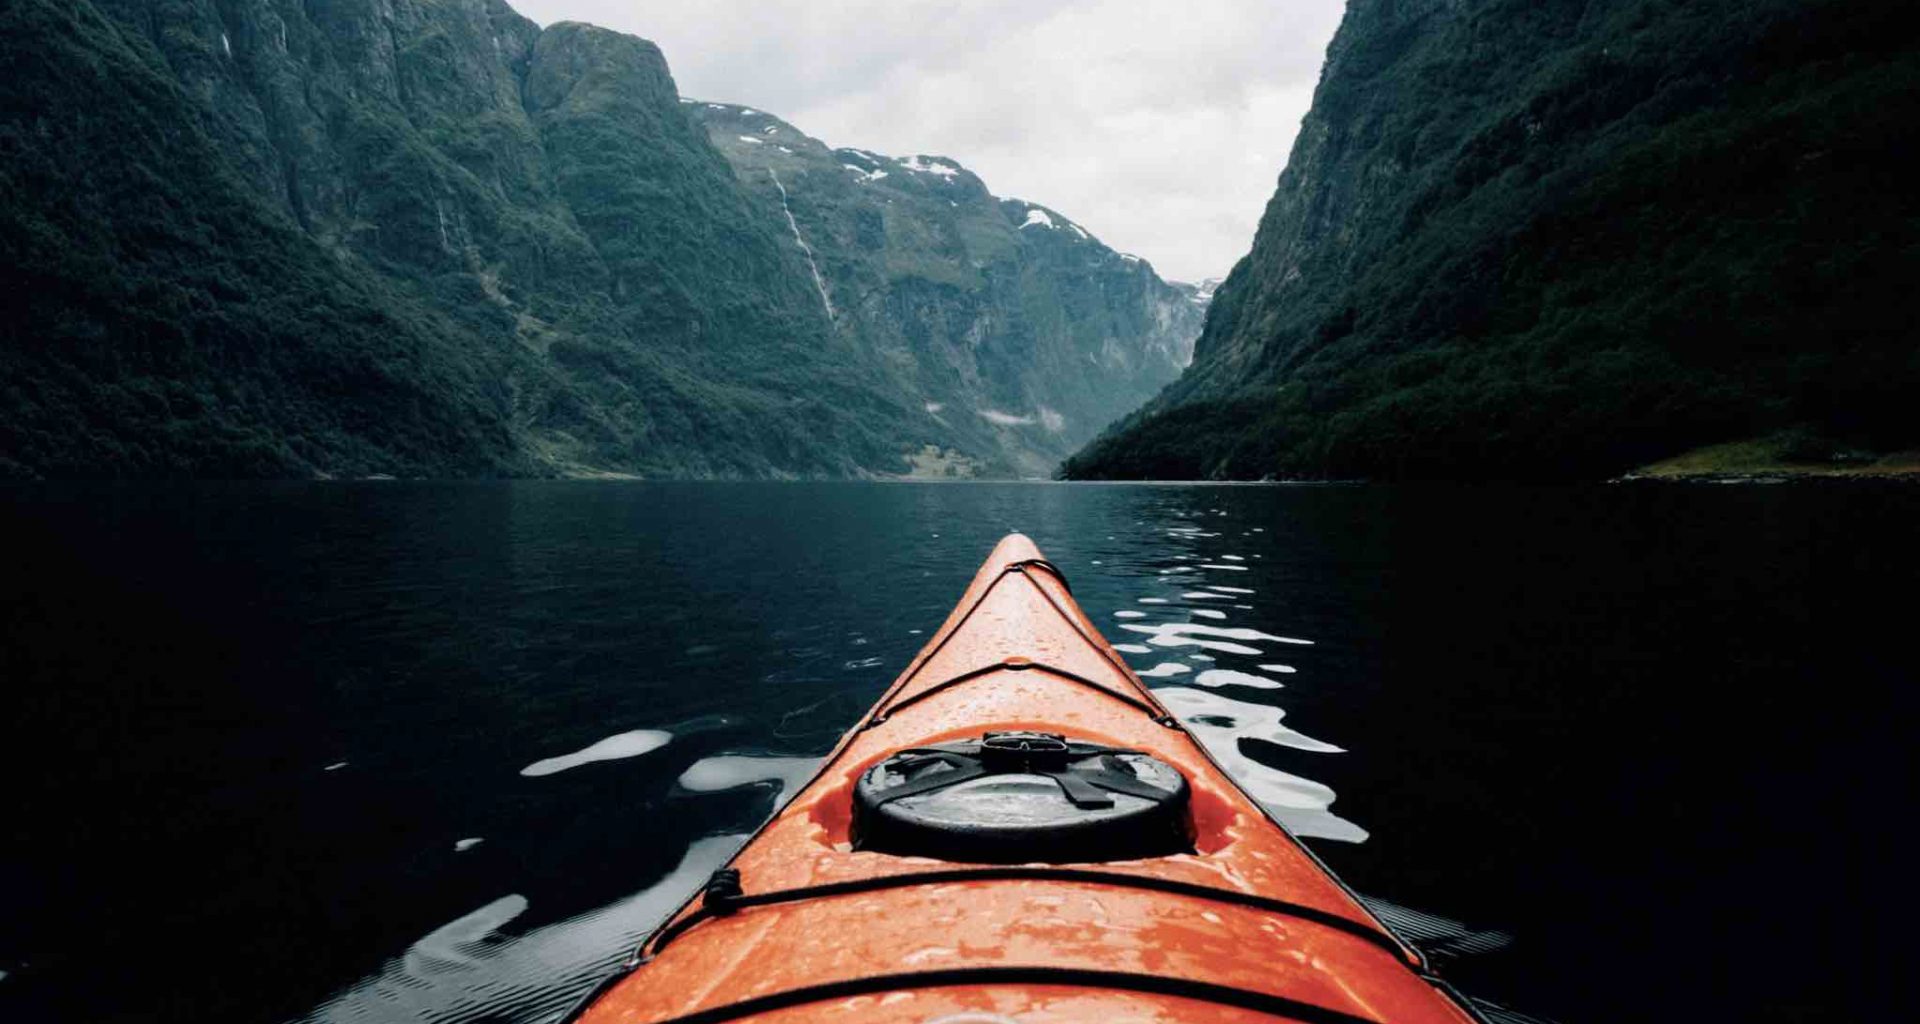 Plan Your Next Kayaking Trip With These Useful Tips - Alvinology